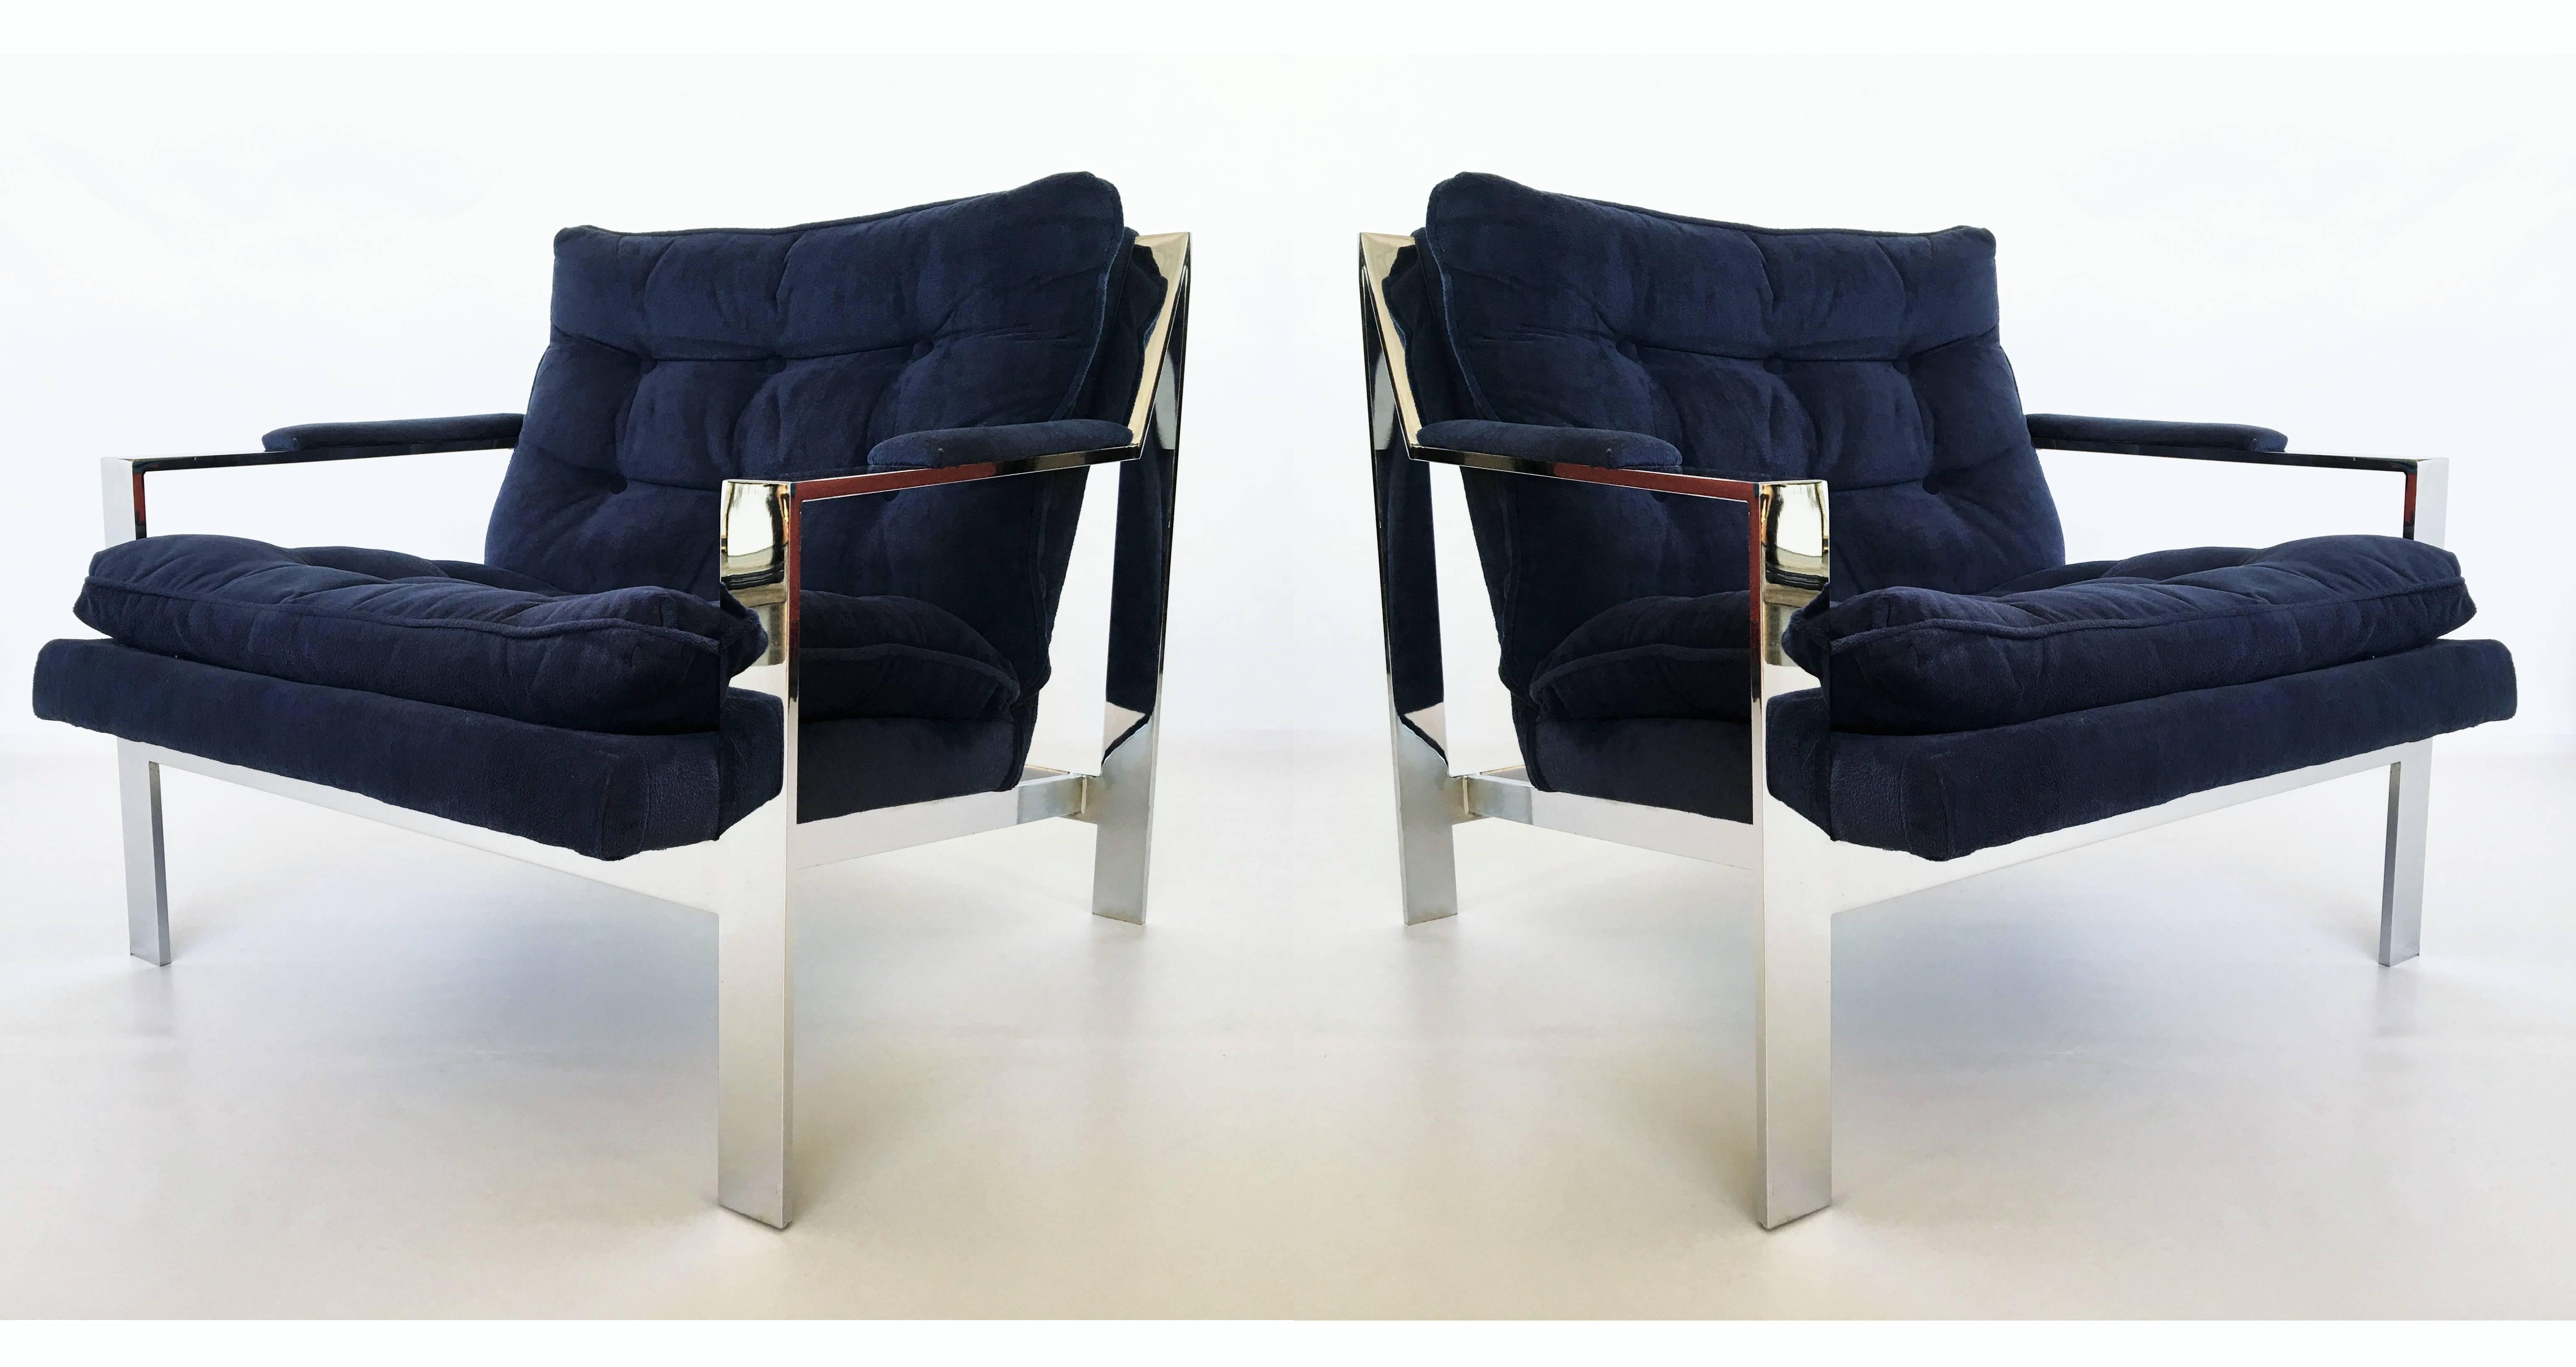 Cy Mann chrome lounge #232 

Beautiful tufted and polished chromed steel modernist lounge chair by Cy Mann of New York. Very similar to Milo Baughman, sculpted chrome frame except this one has the "sled" arms. Upholstered in navy blue